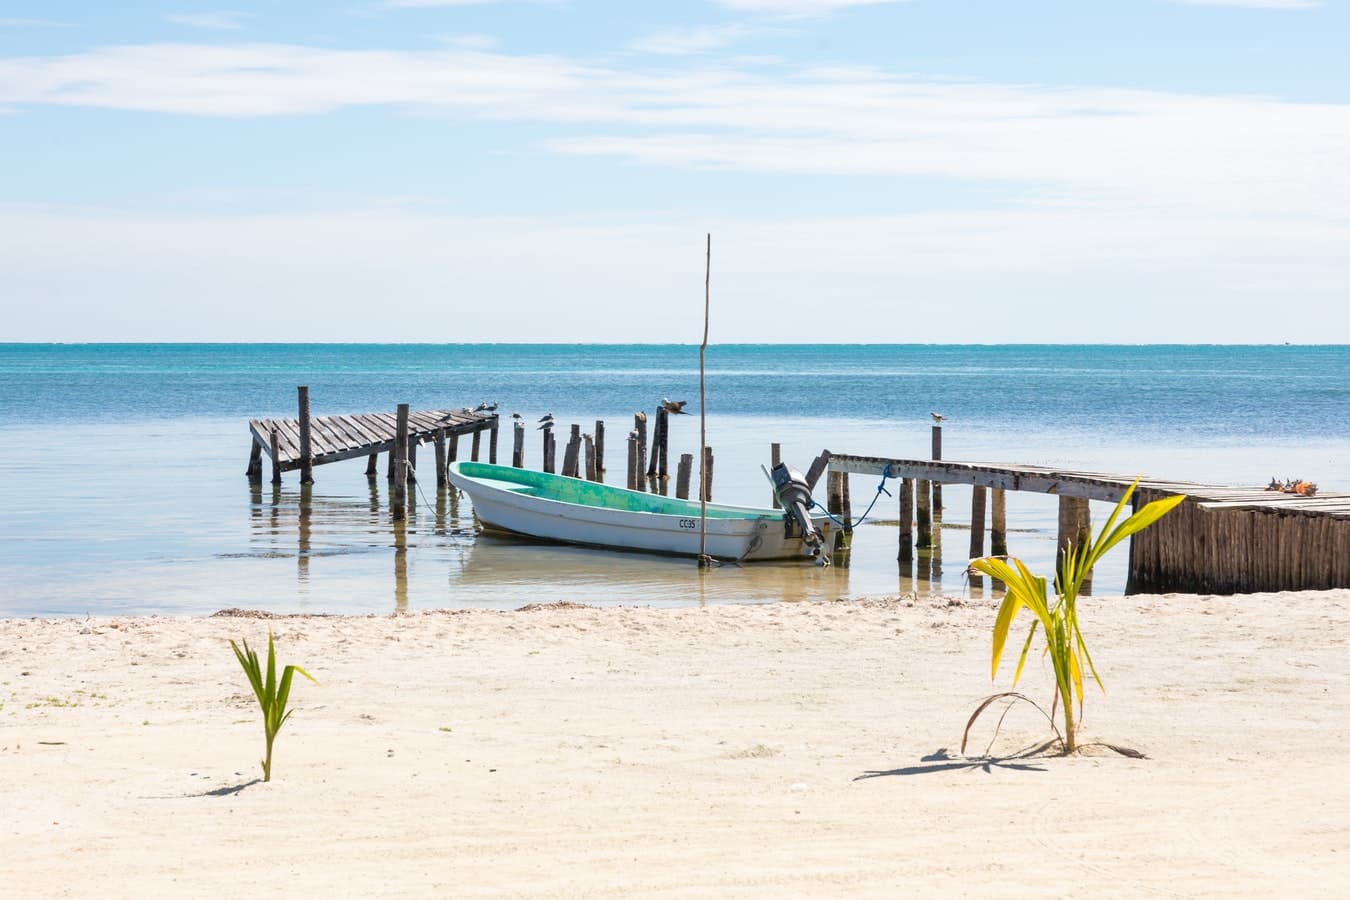 Go Slow With These 12 Fun Things To Do in Caye Caulker, Belize!